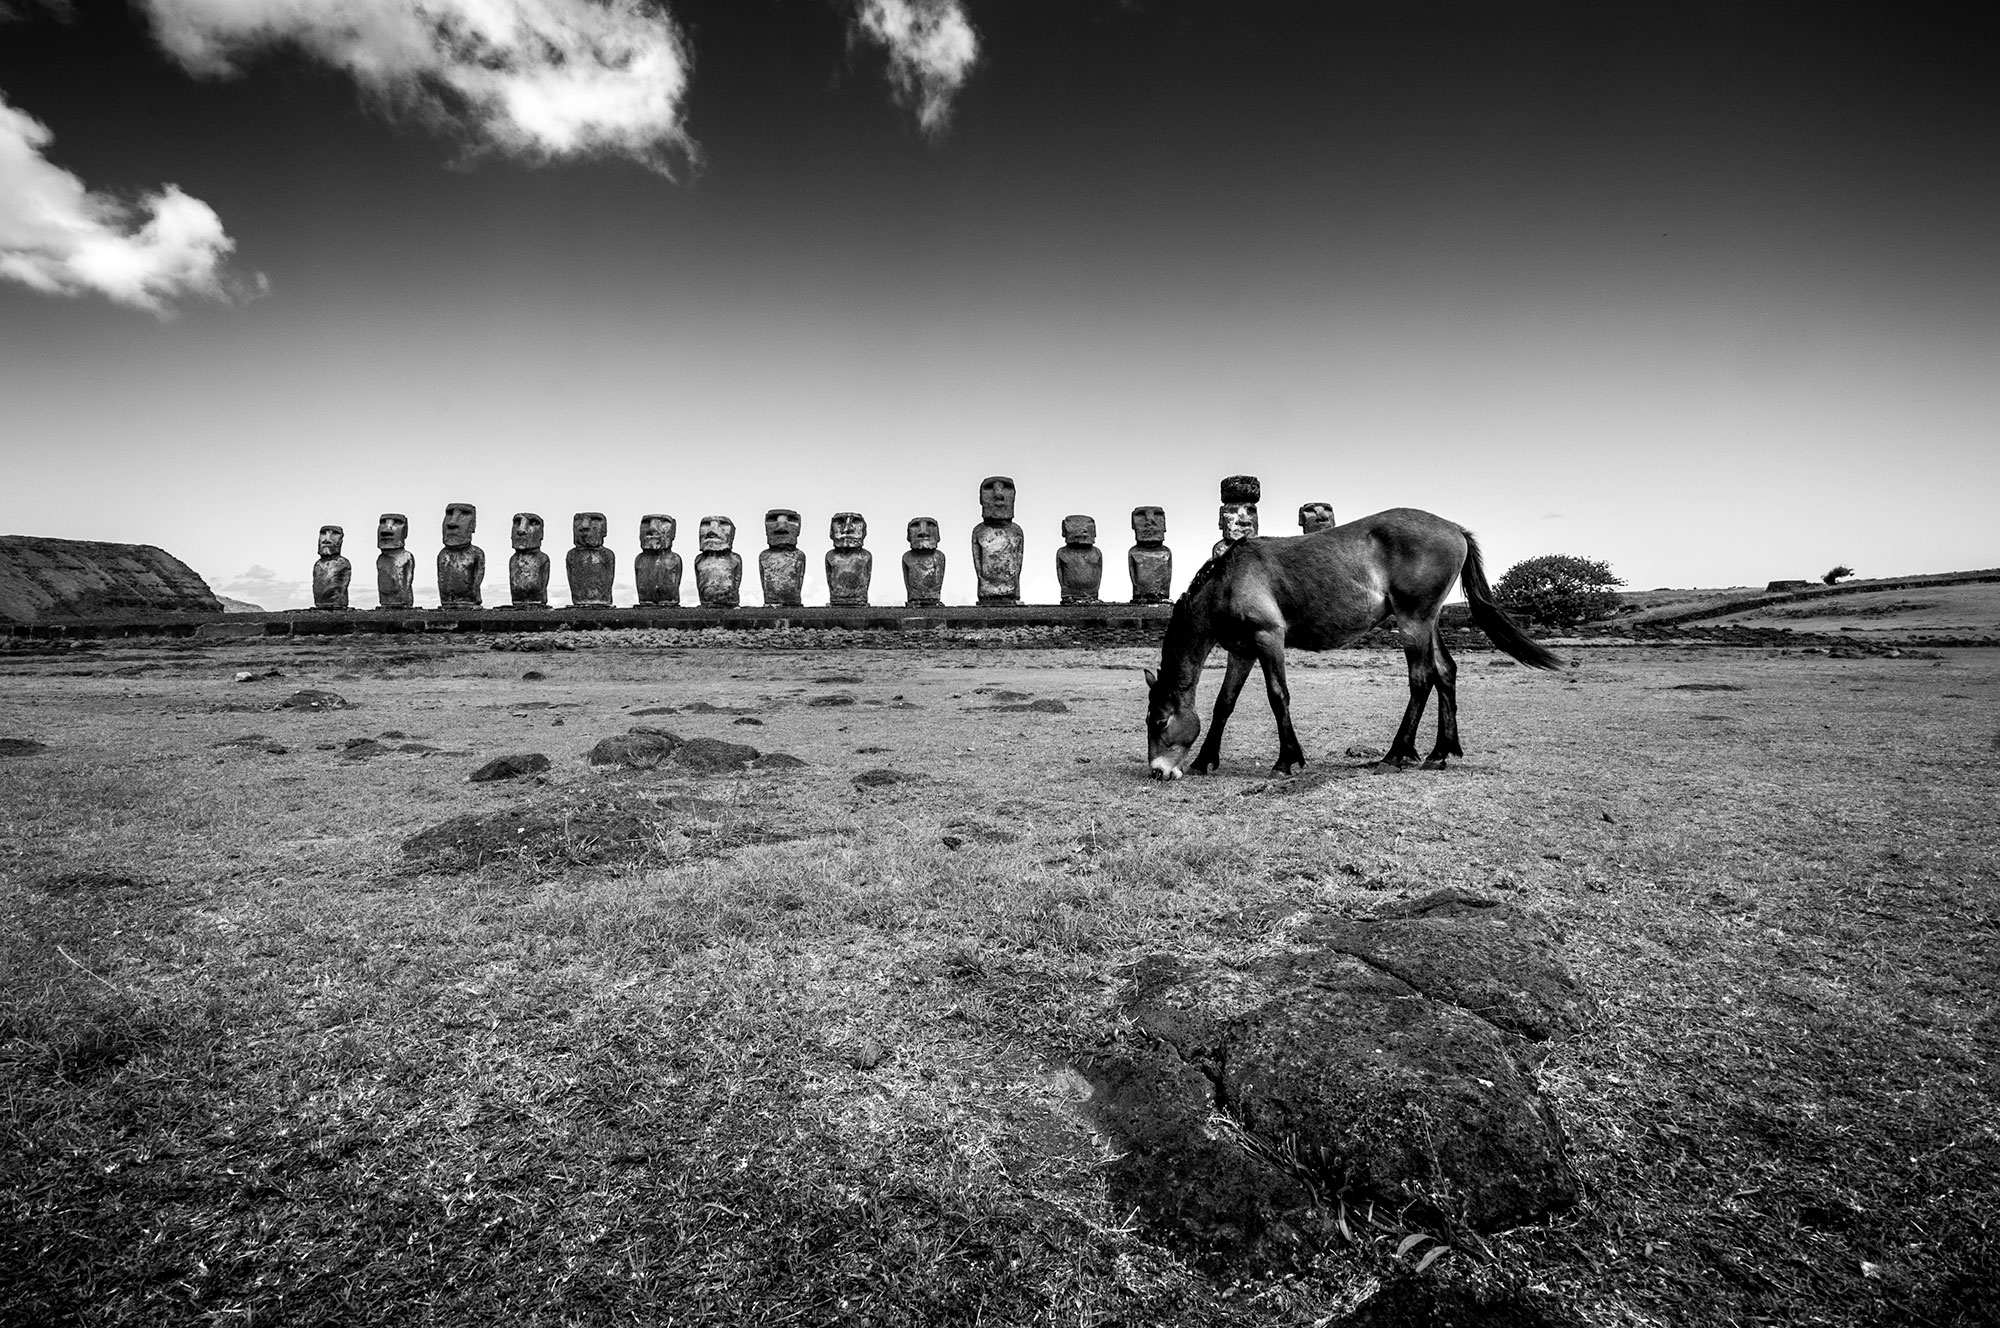 Black and white photograph oof a horse on Easter Island.